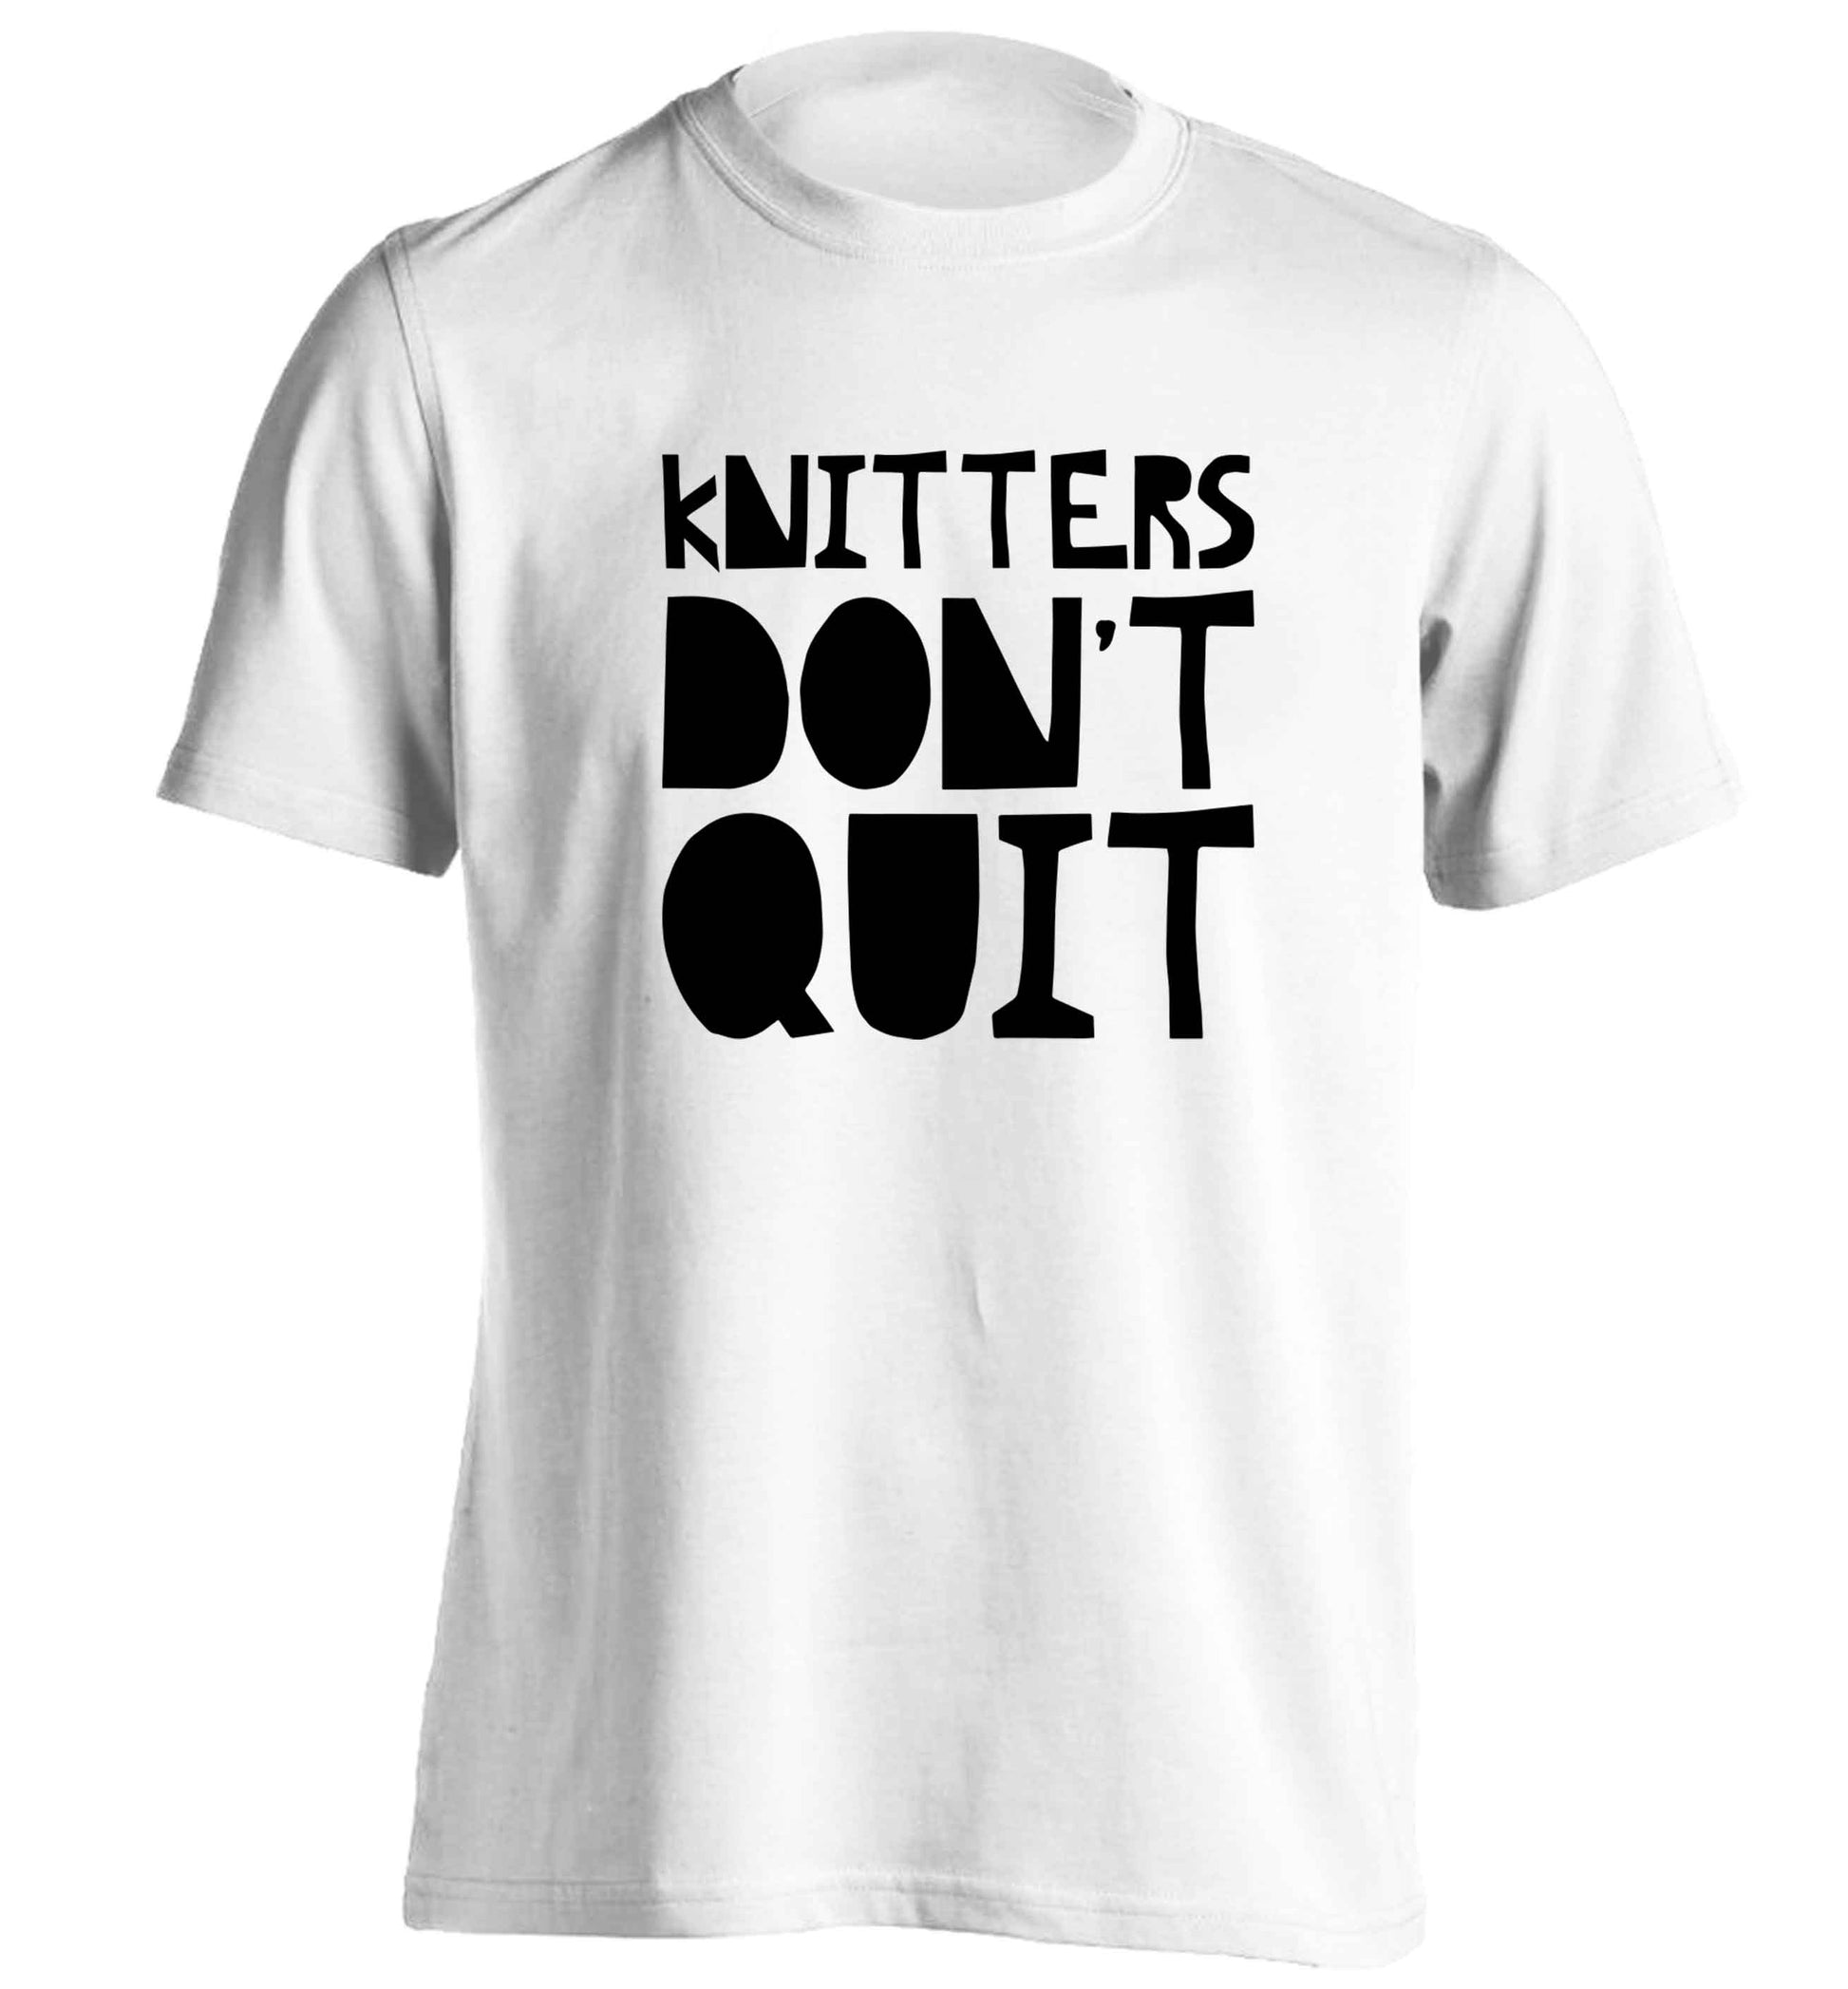 Knitters don't quit adults unisex white Tshirt 2XL